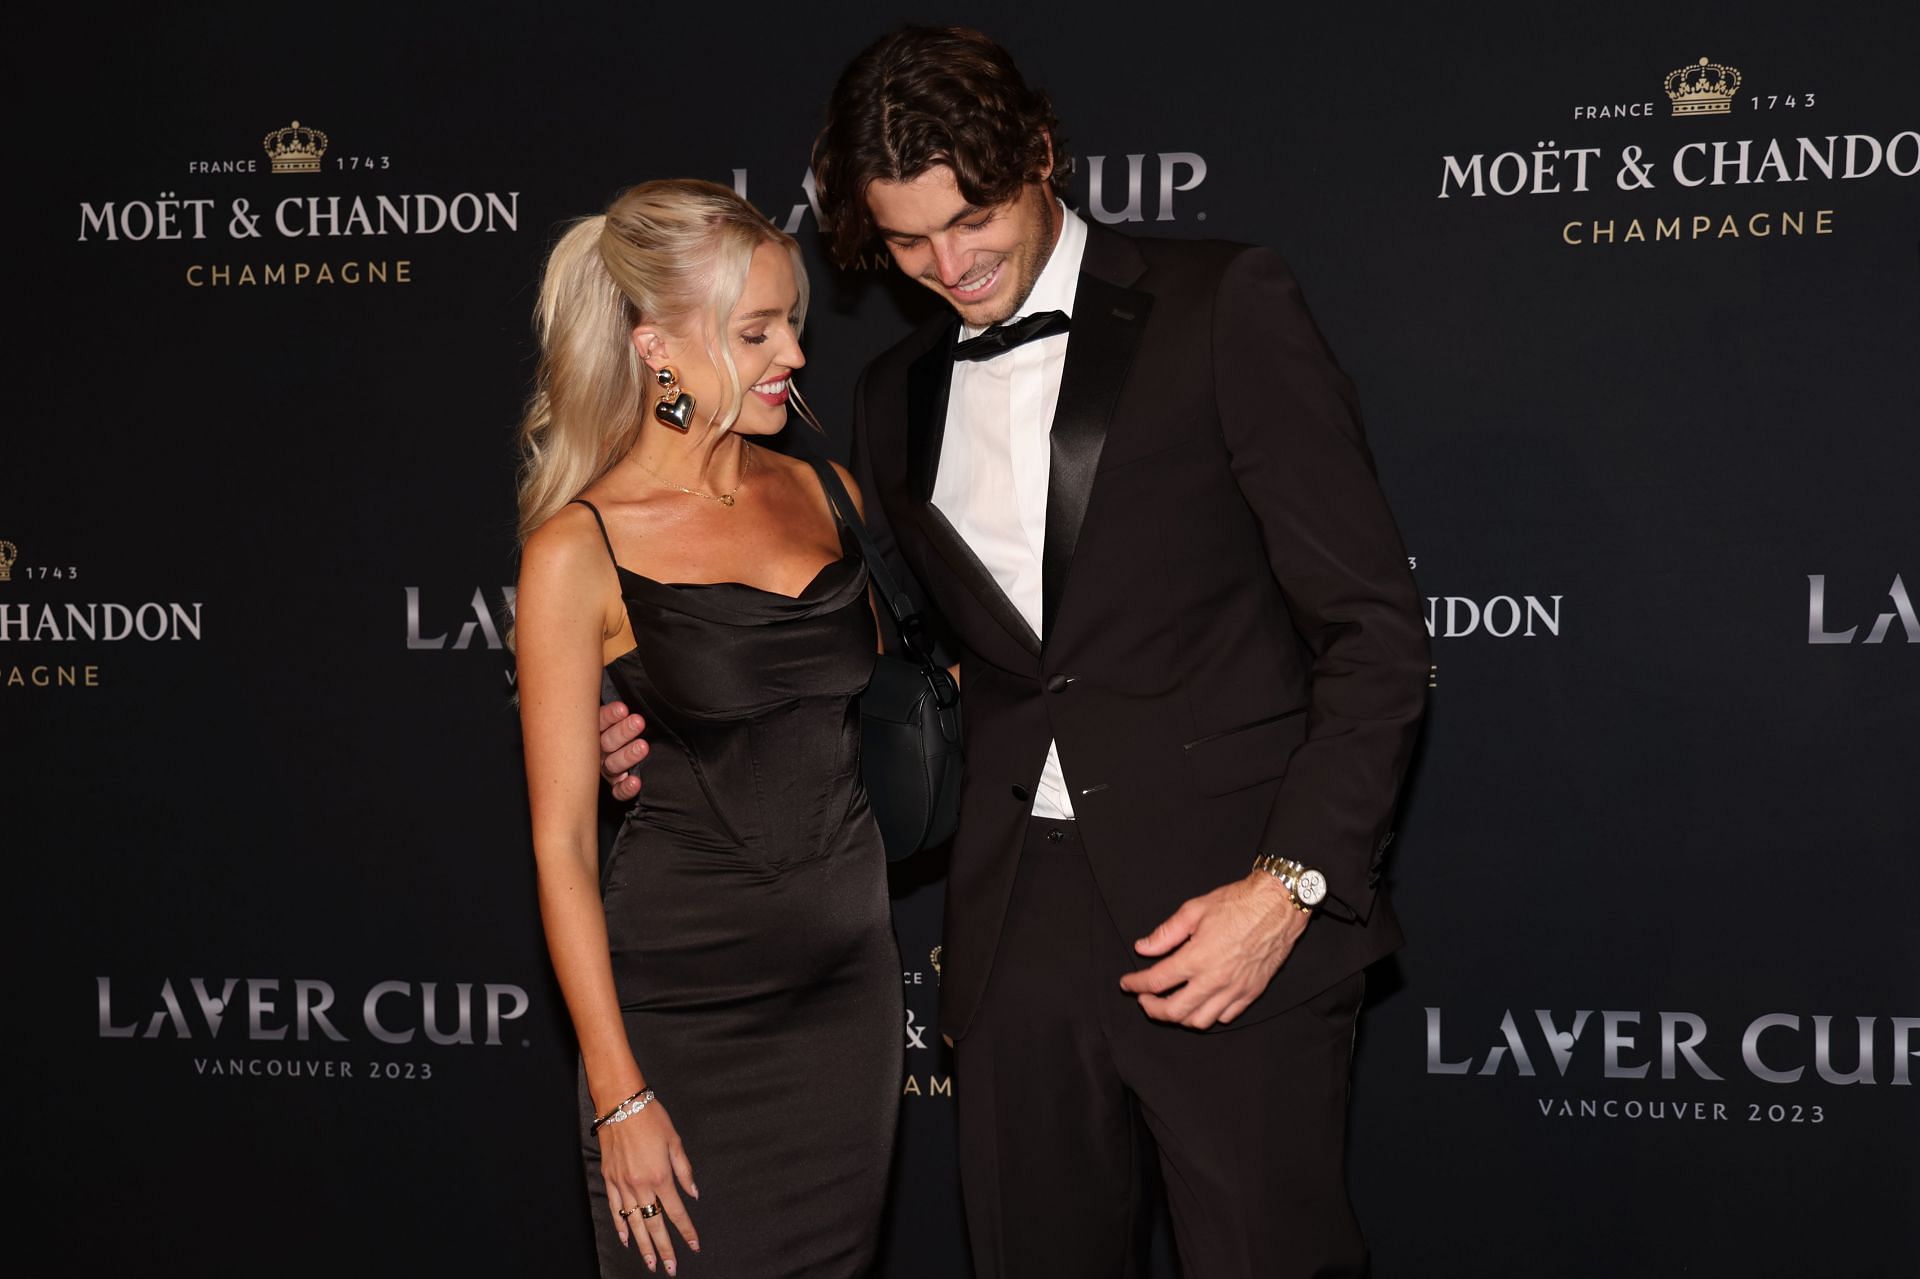 Morgan Riddle (L) with boyfriend Taylor Fritz (R) at the 2023 Laver Cup